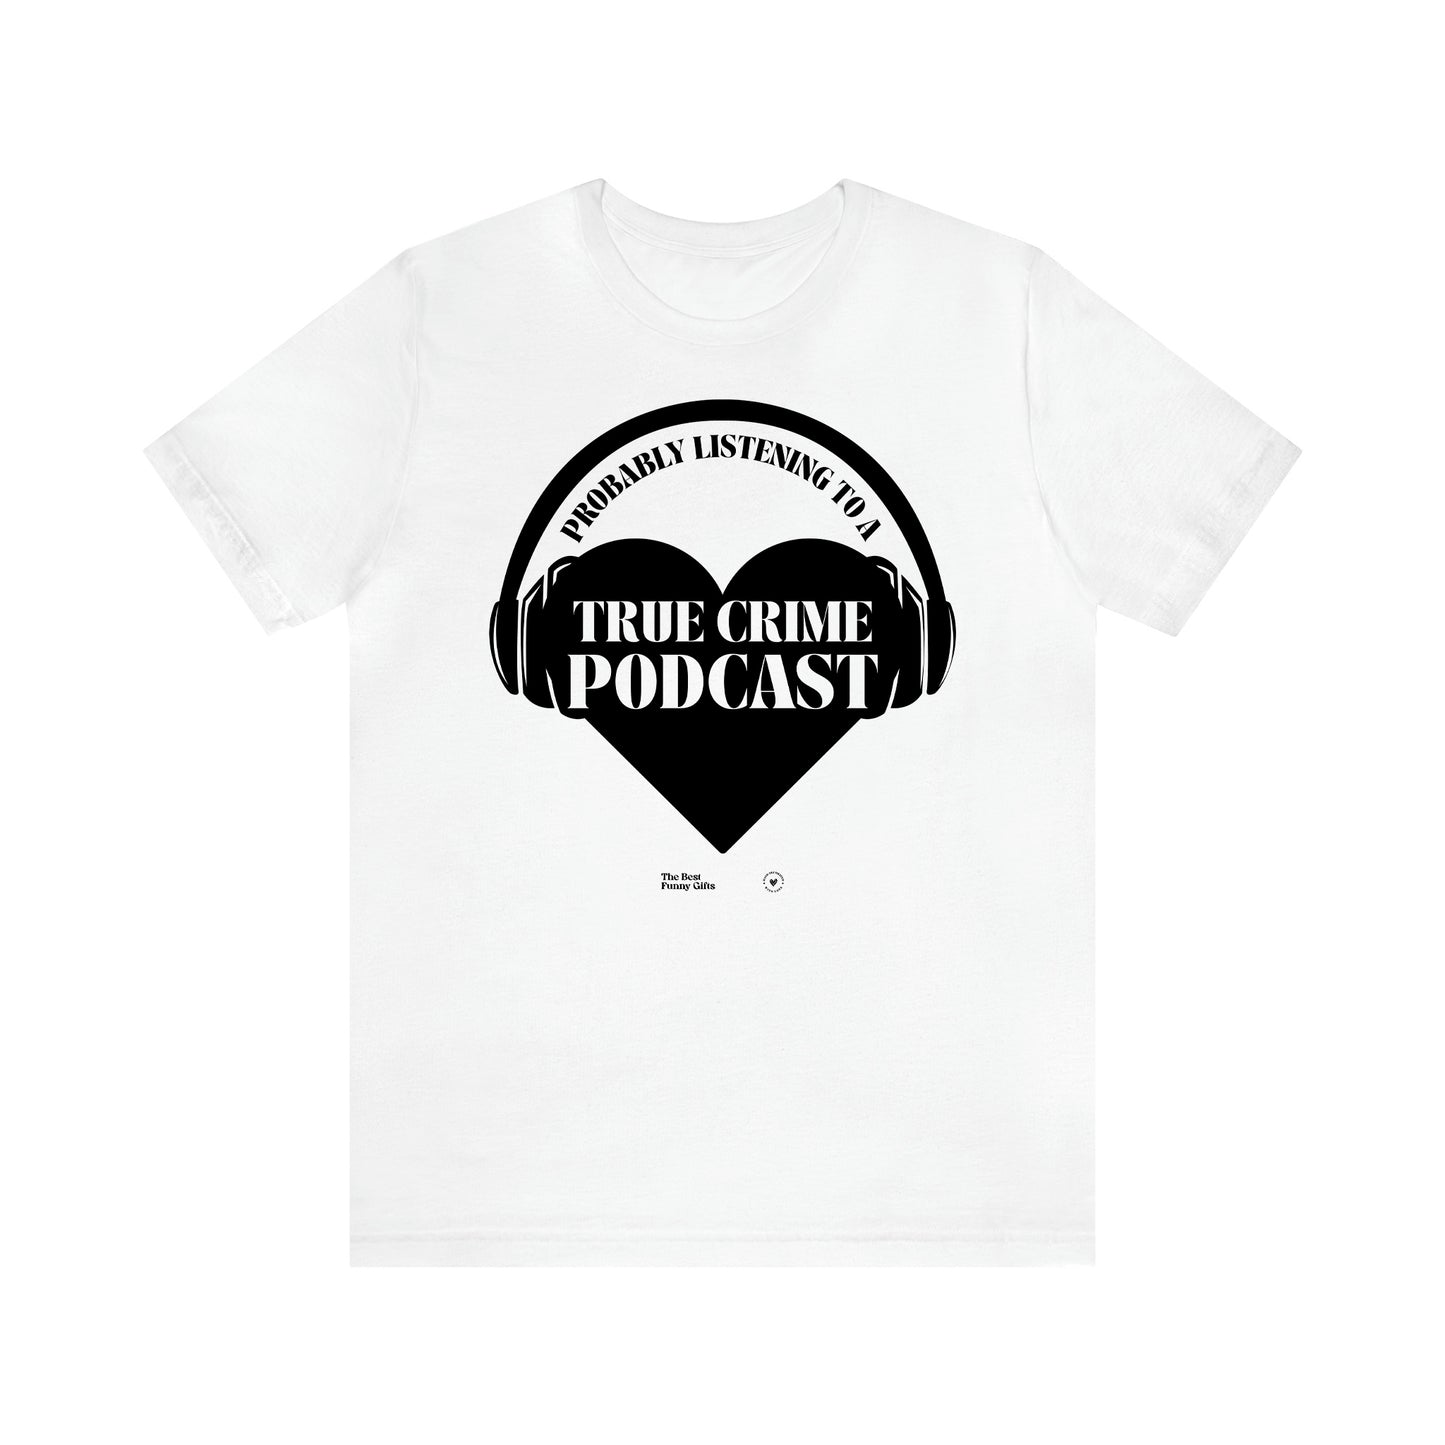 Women's T Shirts Probably Listening to a True Crime Podcast - The Best Funny Gifts